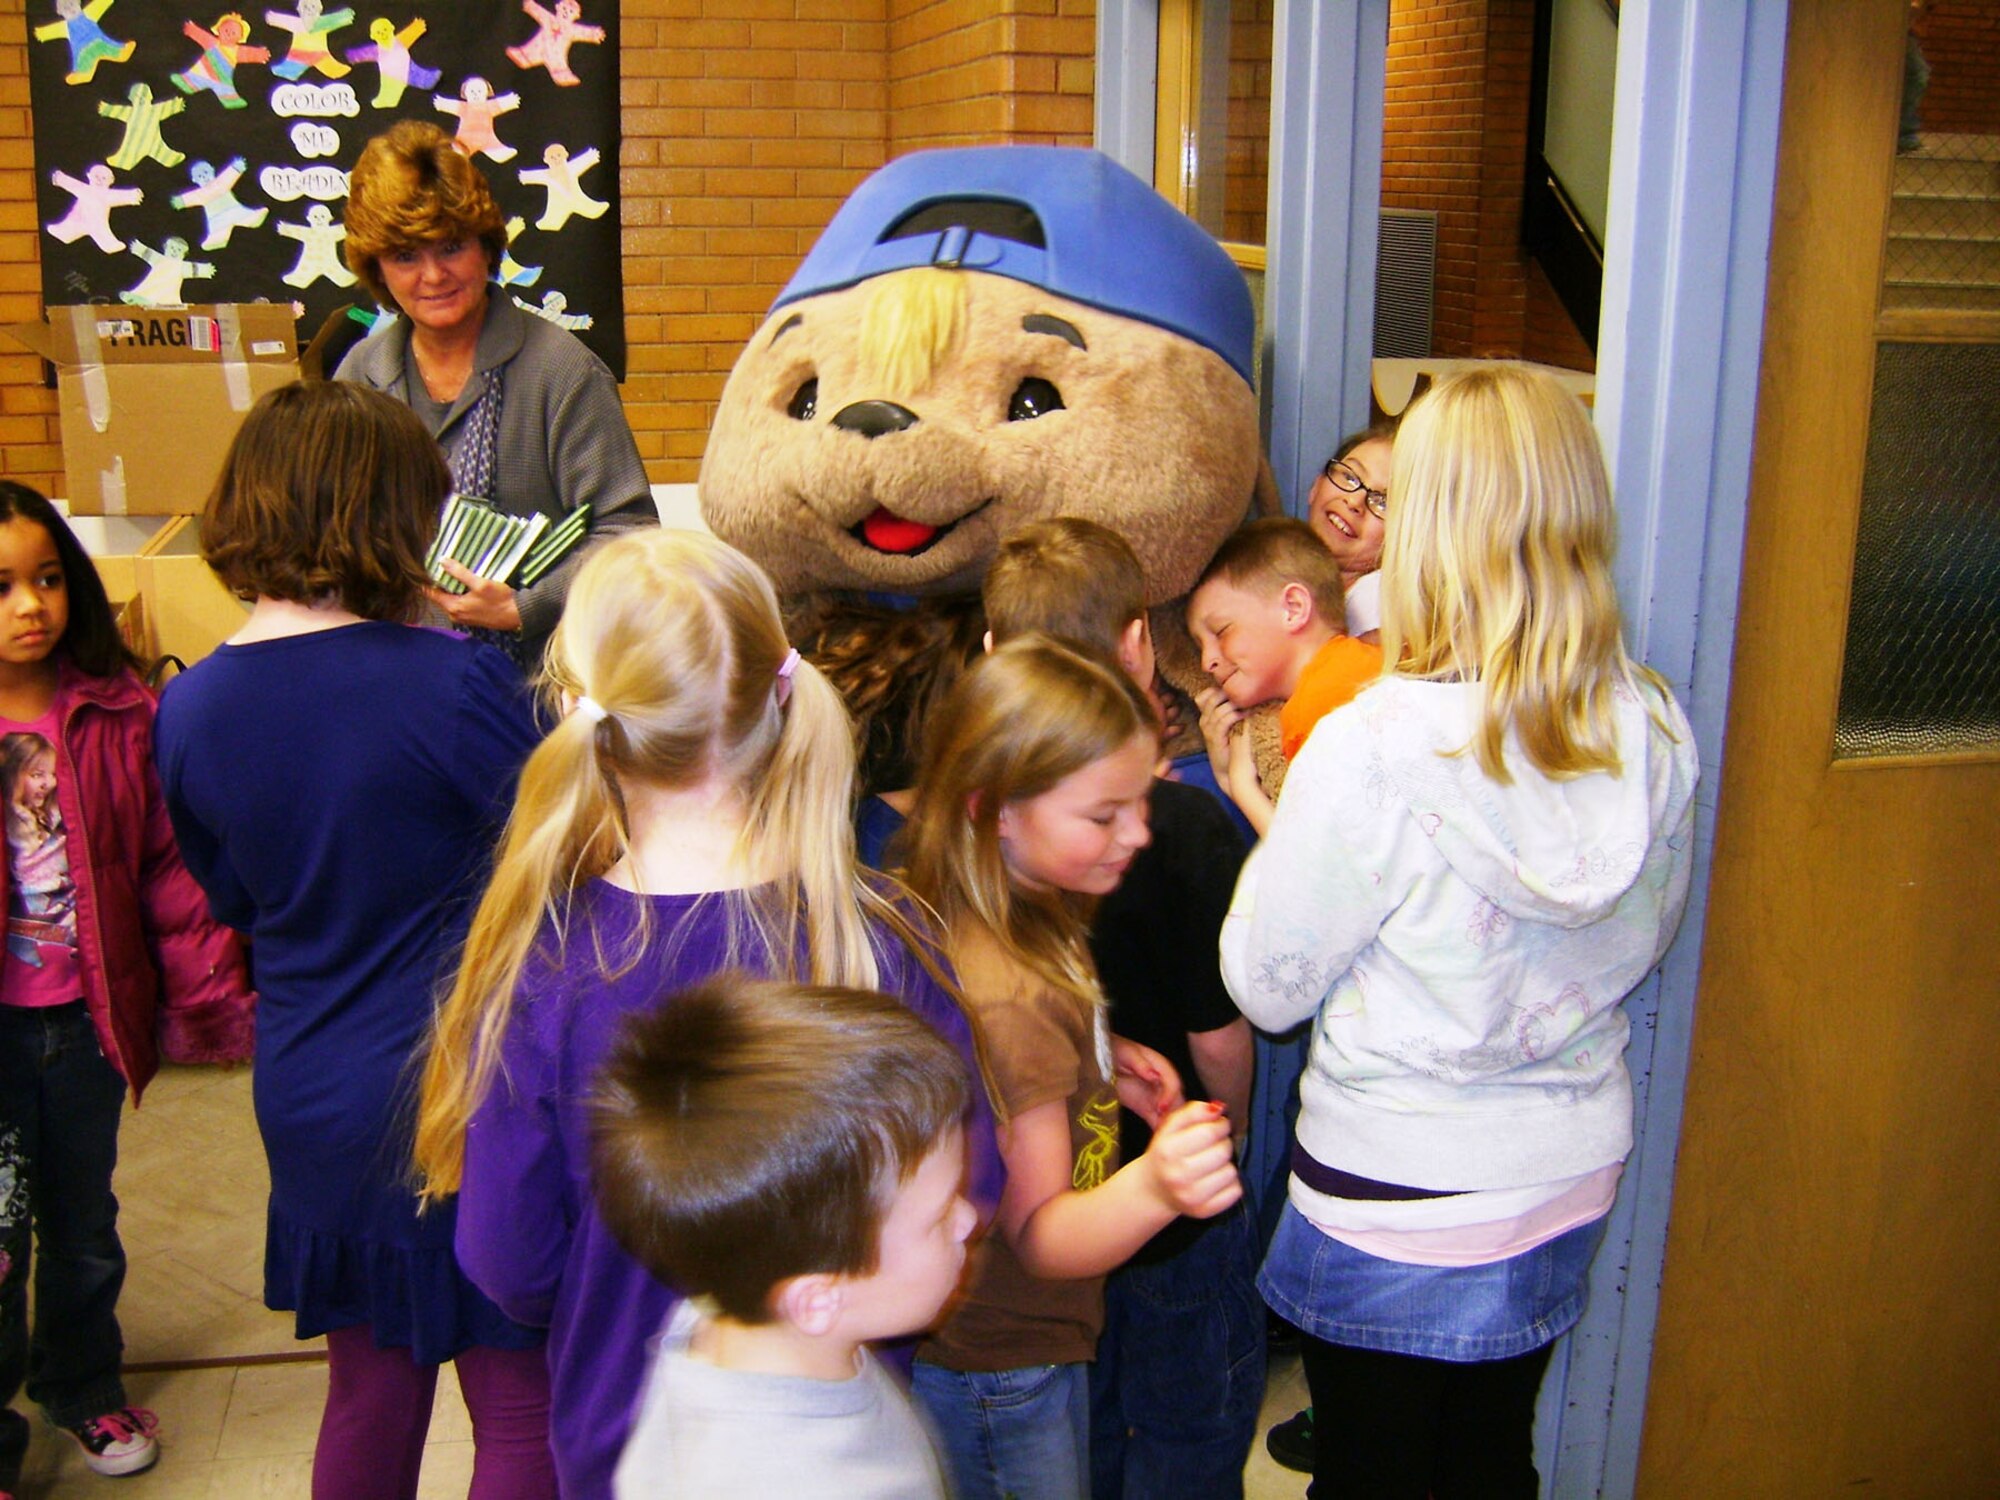 Sammy Rabbit greets kids after a recent show. Author Sam Renick and his “Sammy Rabbit” children’s book character will be coming to Hanscom Aug. 19 to teach children tips about finances. (Courtesy photo)